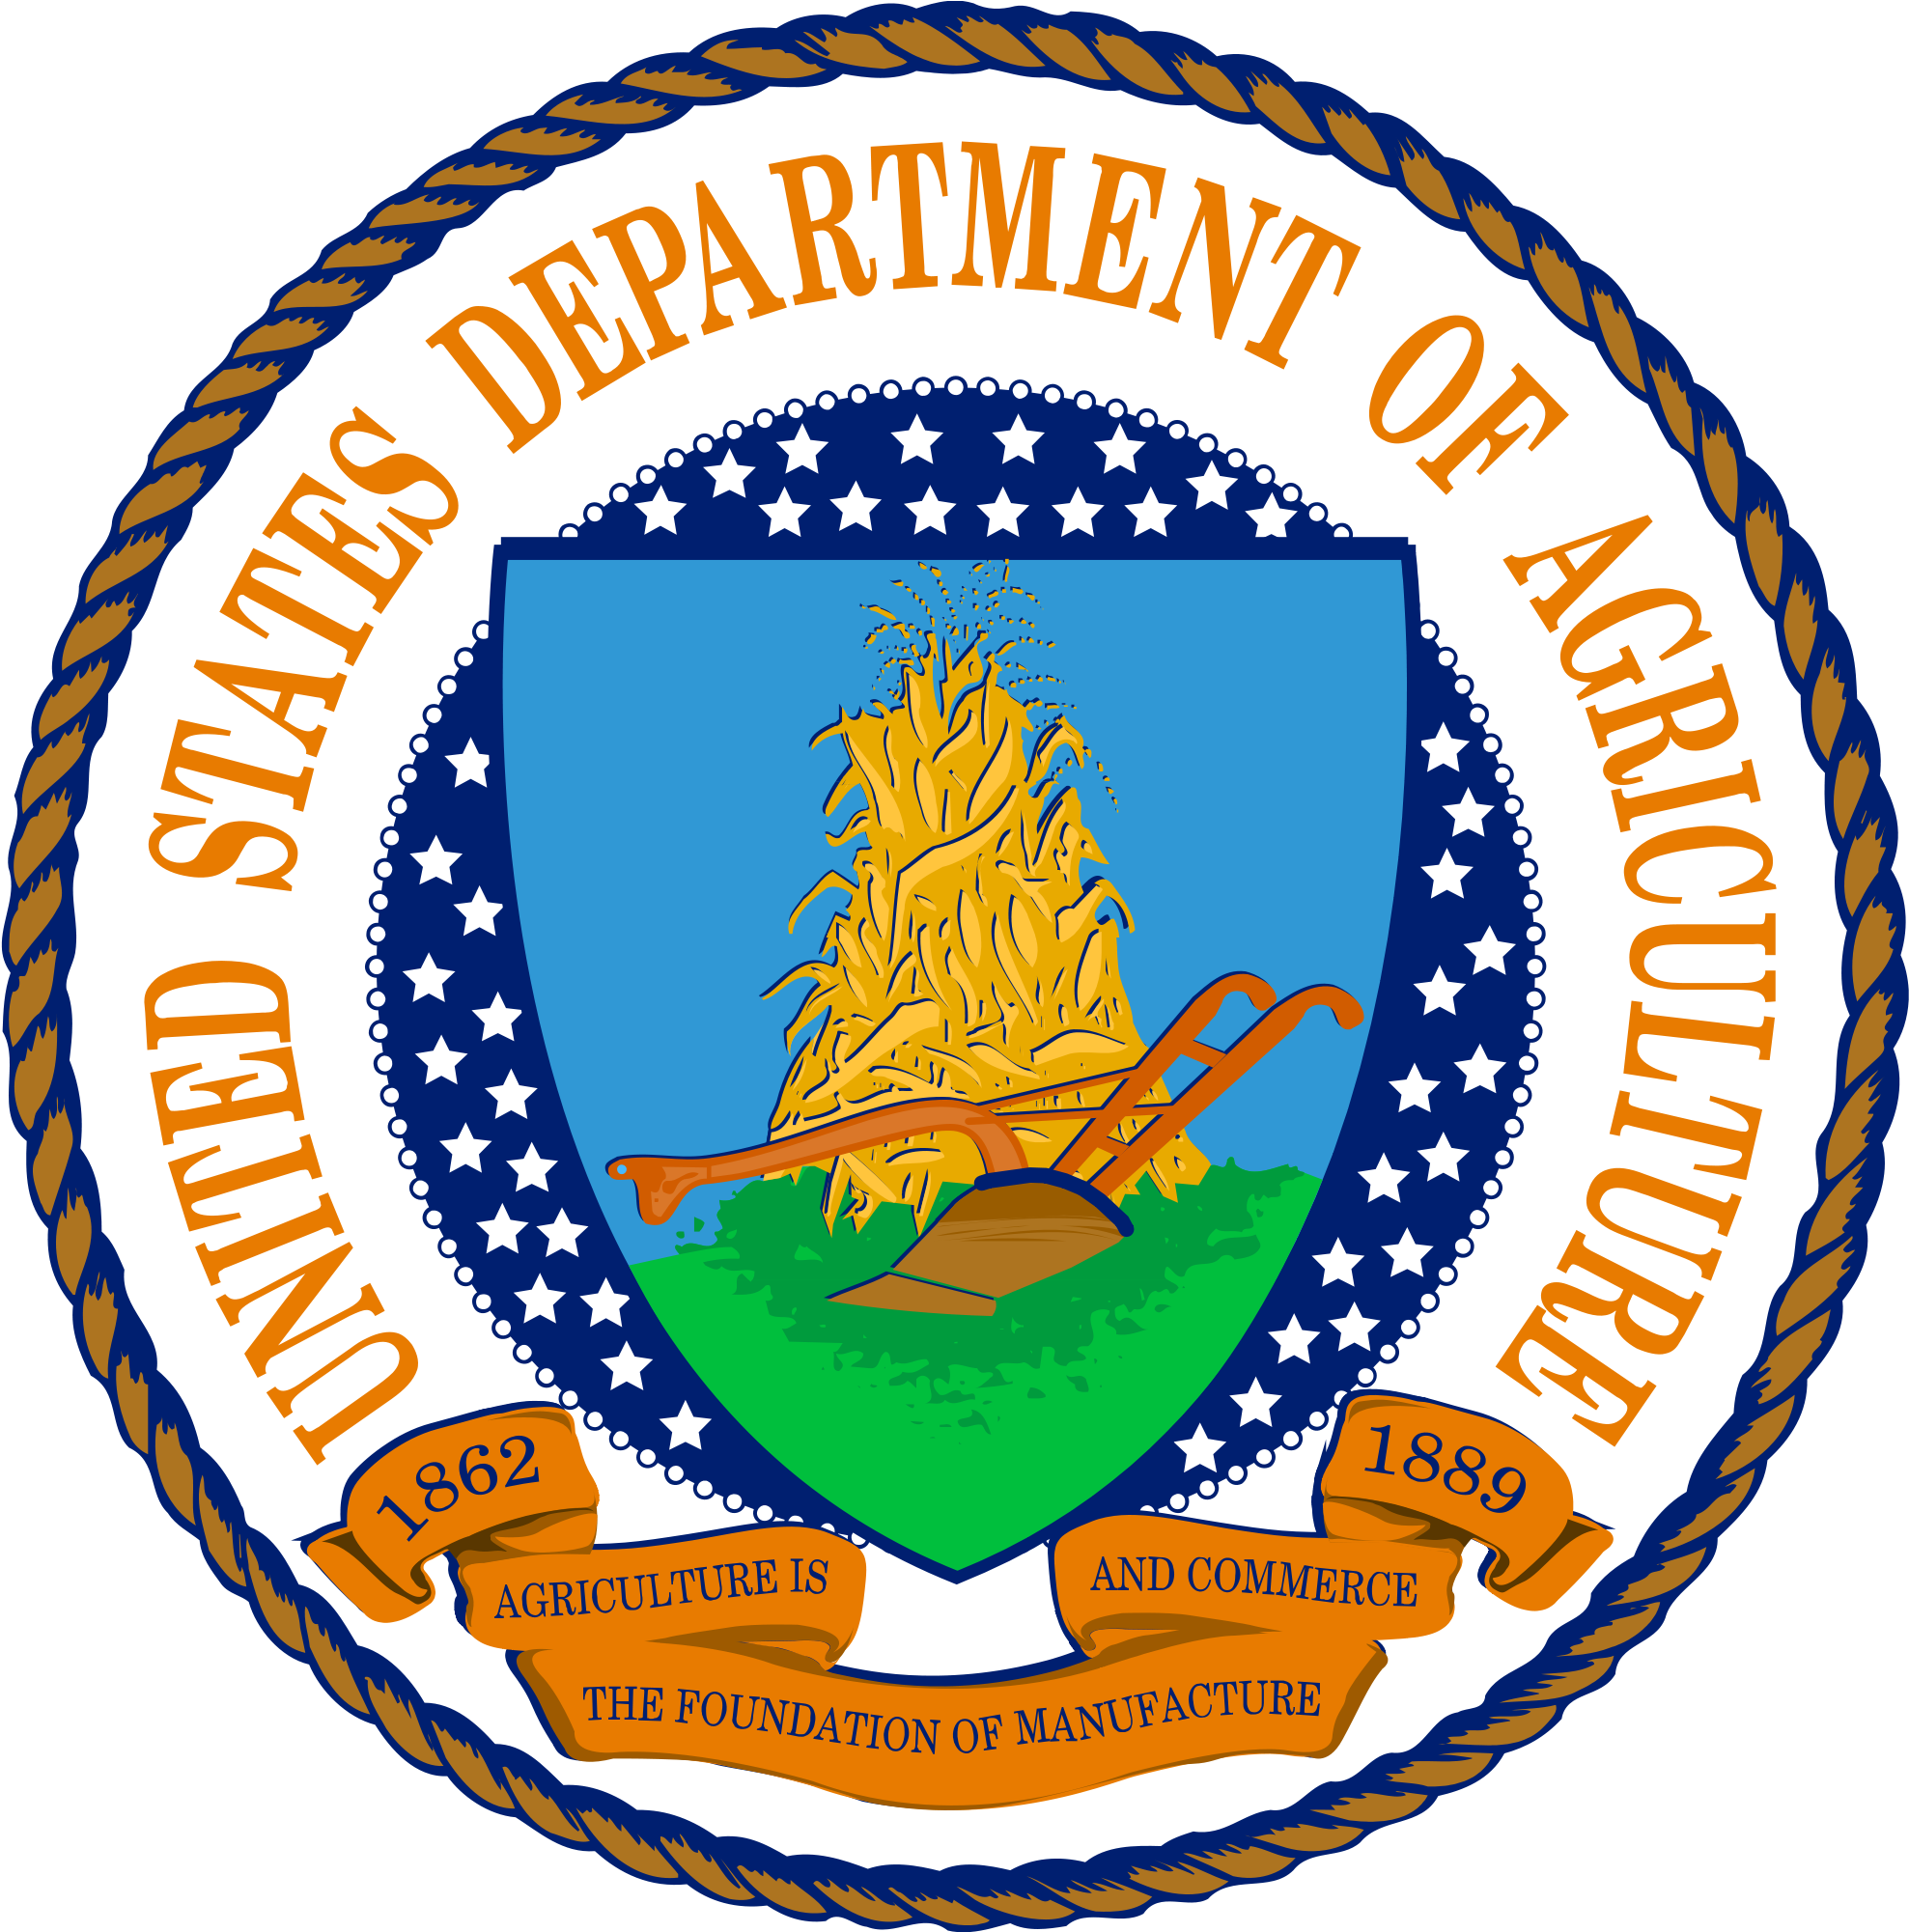 United States Department Of Agriculture - Secretary Of Agriculture Seal (2000x2000)